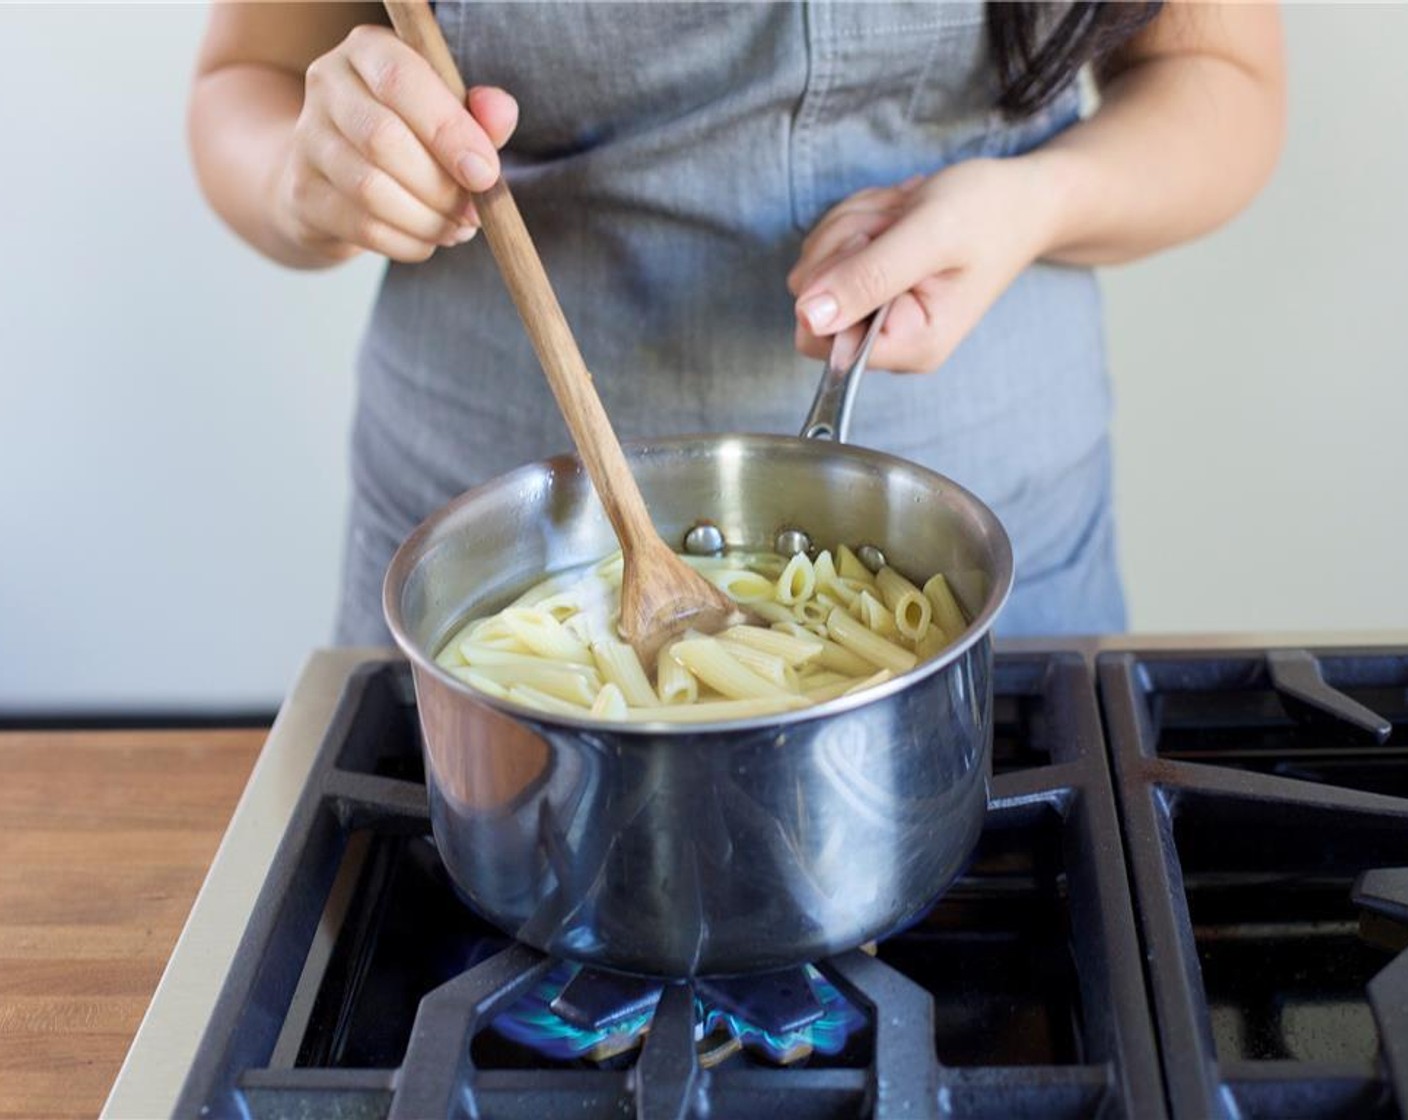 step 5 When water reaches a boil, add Penne Pasta (8 oz) and stir. Cook for 11 minutes, or until desired texture. Drain pasta into a colander and then return to the large pot, placed over medium low heat.